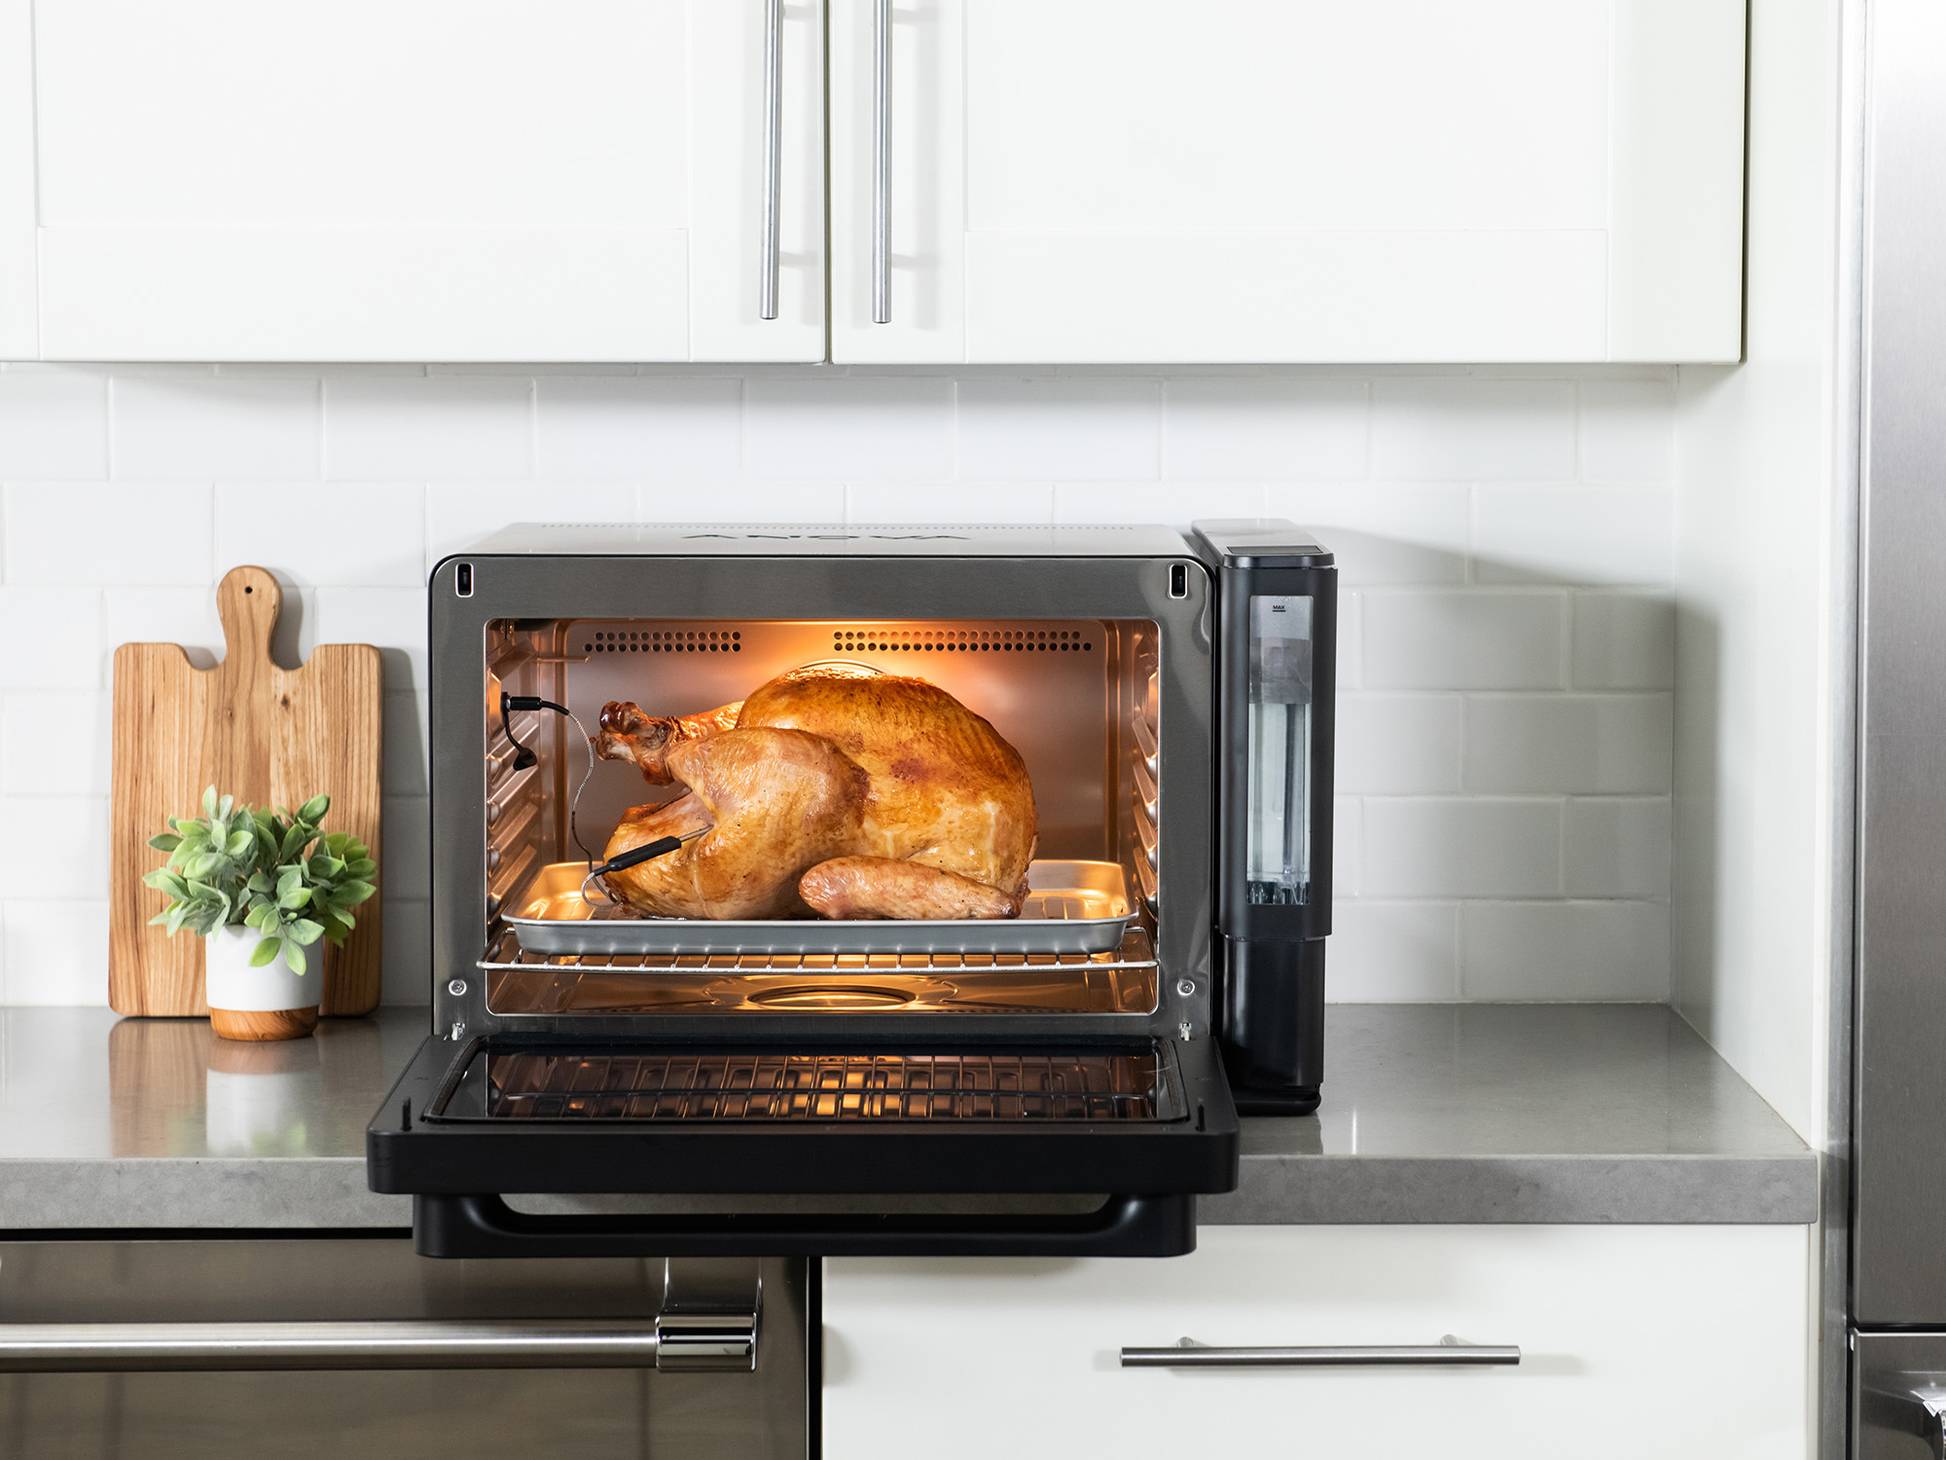 https://cld.accentuate.io/7274993025213/1666836550208/Copy-of-Oven-Turkey.jpg?v=1666836550208&options=w_1946